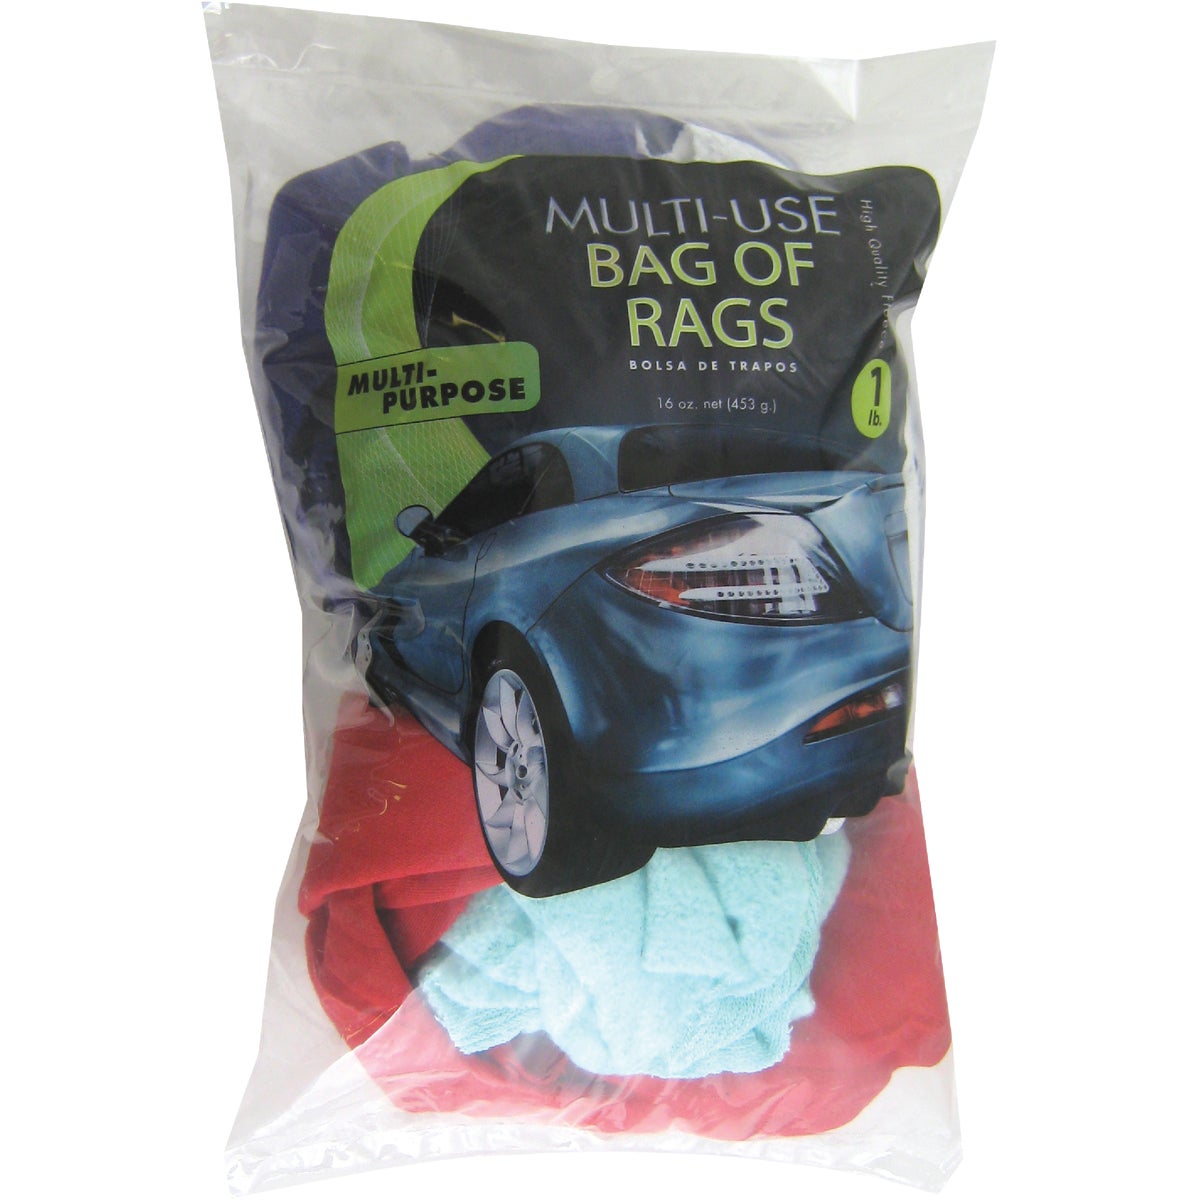 Item 571873, One pound bag of rags is ideal for every day activities, from cleaning to 